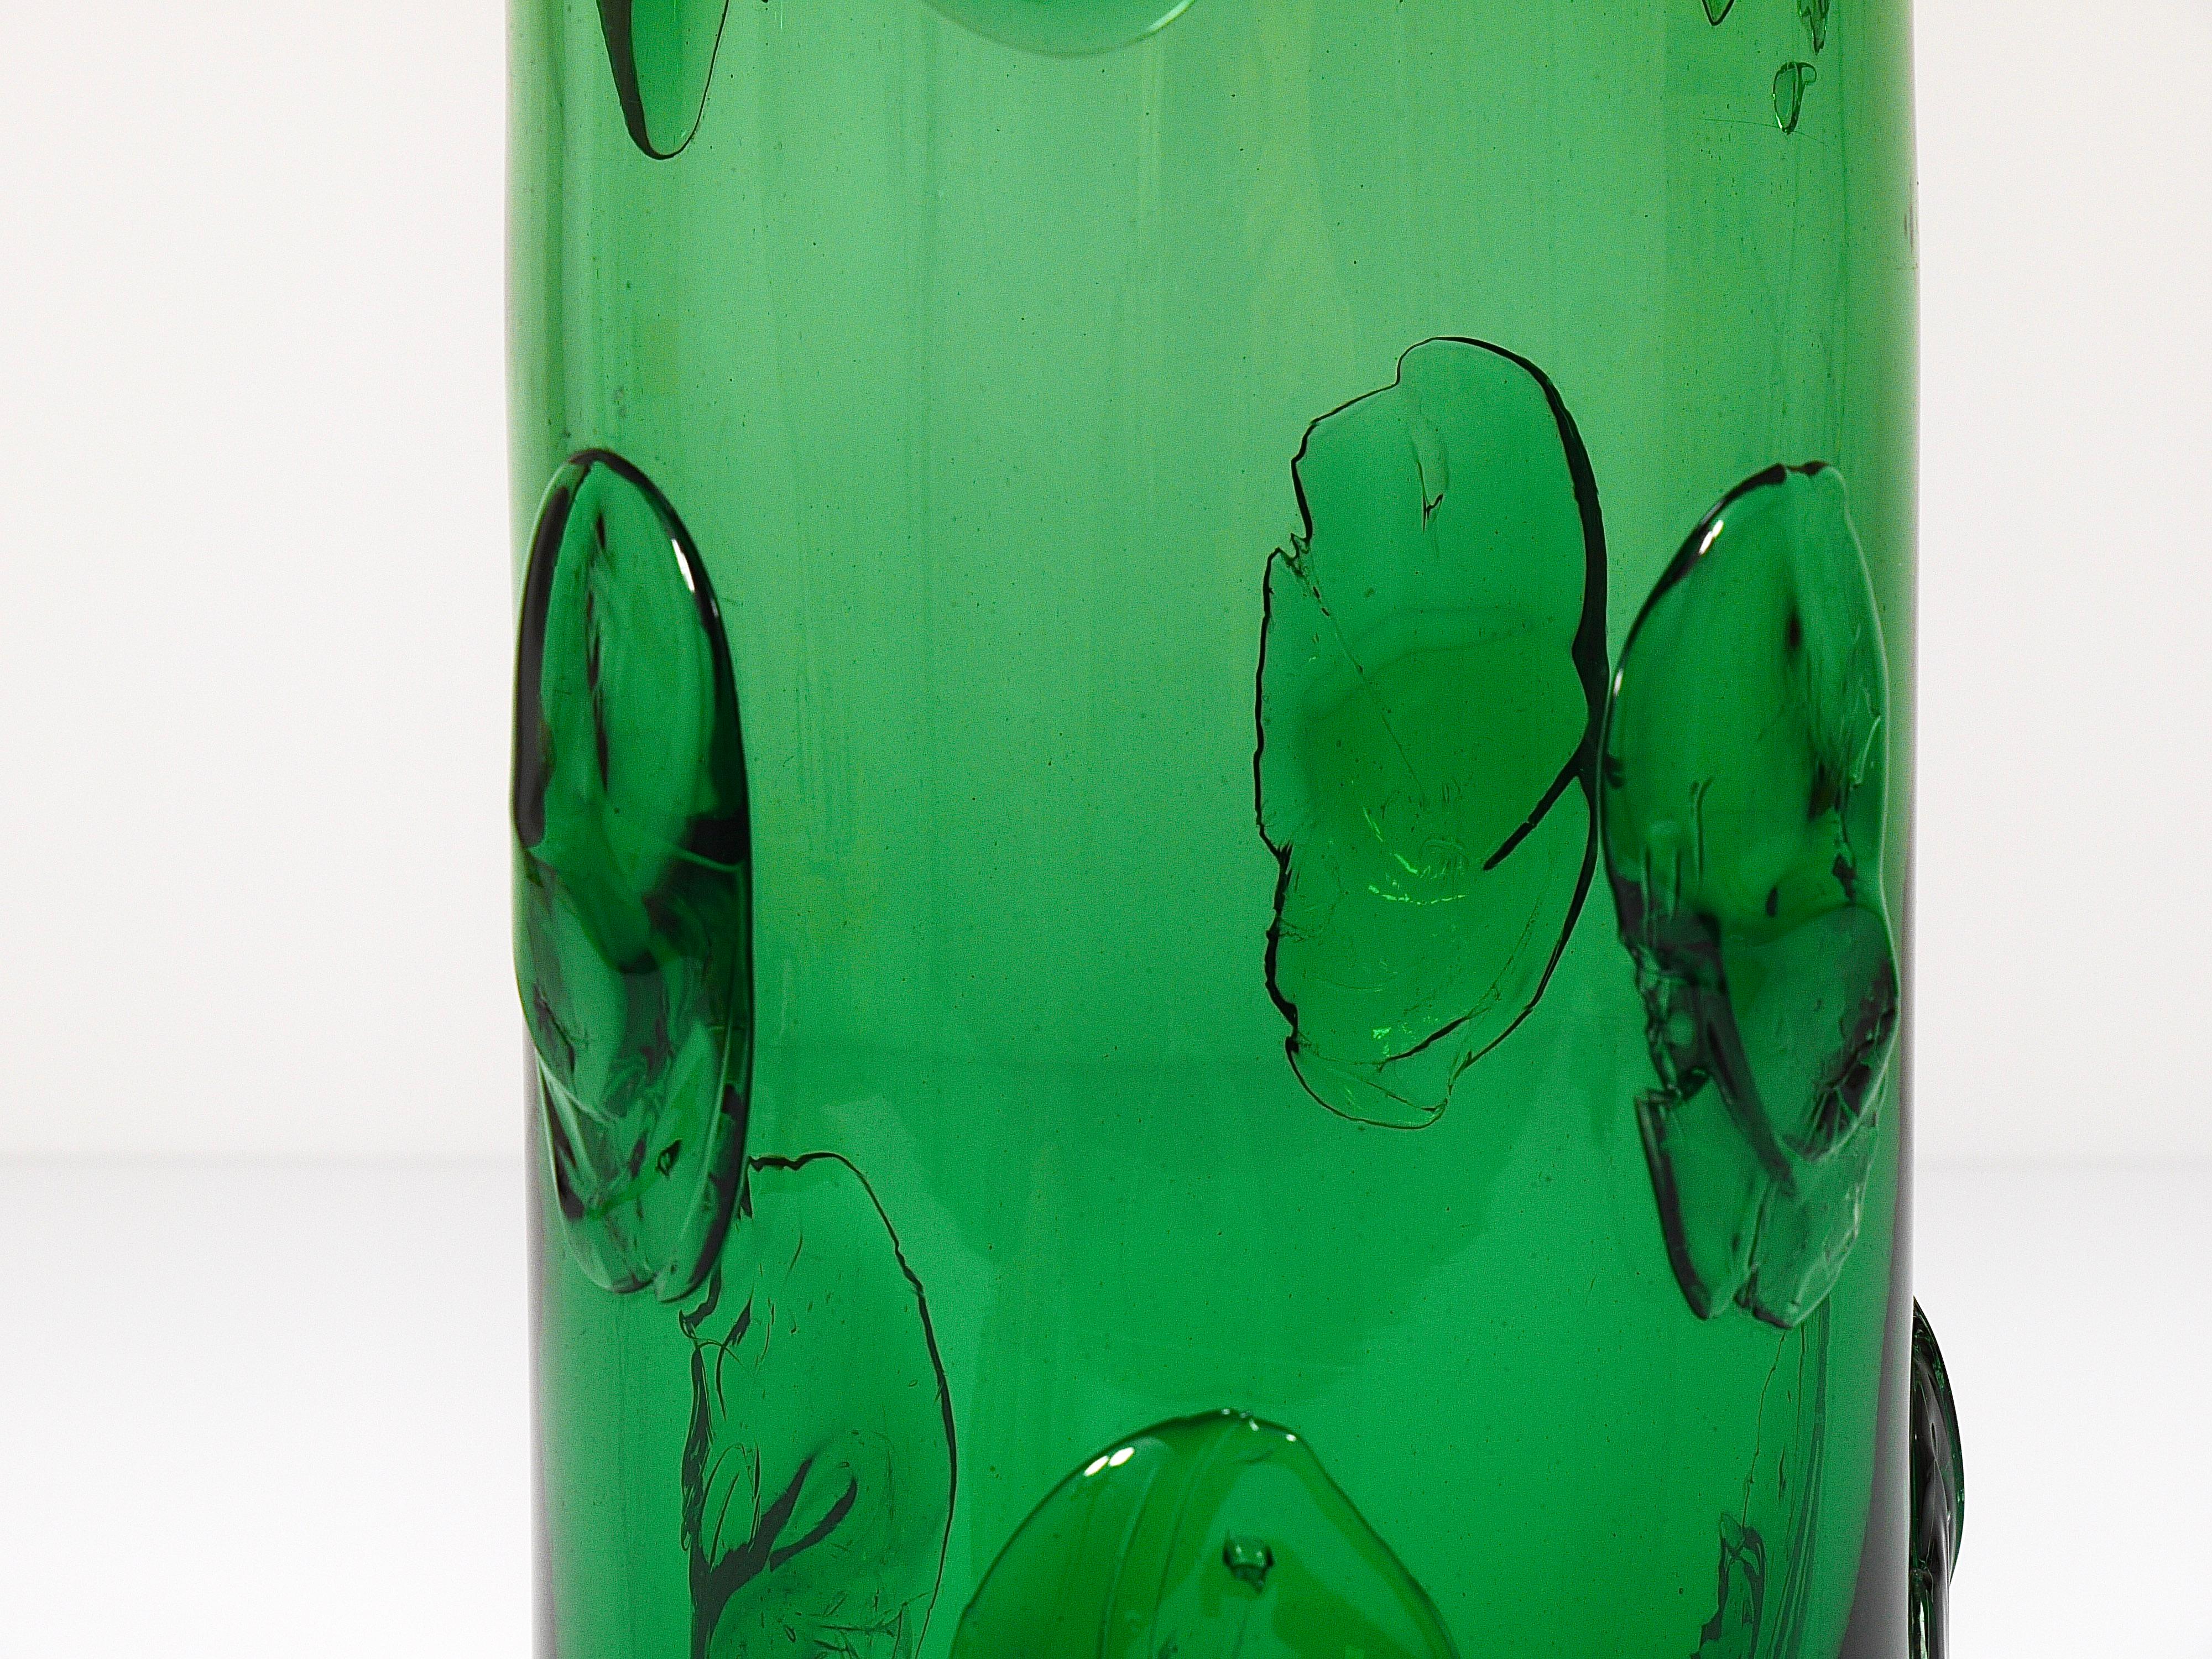 Huge Vetro Verde di Empoli Green Glass Vase, Italy, 1960s In Good Condition For Sale In Vienna, AT